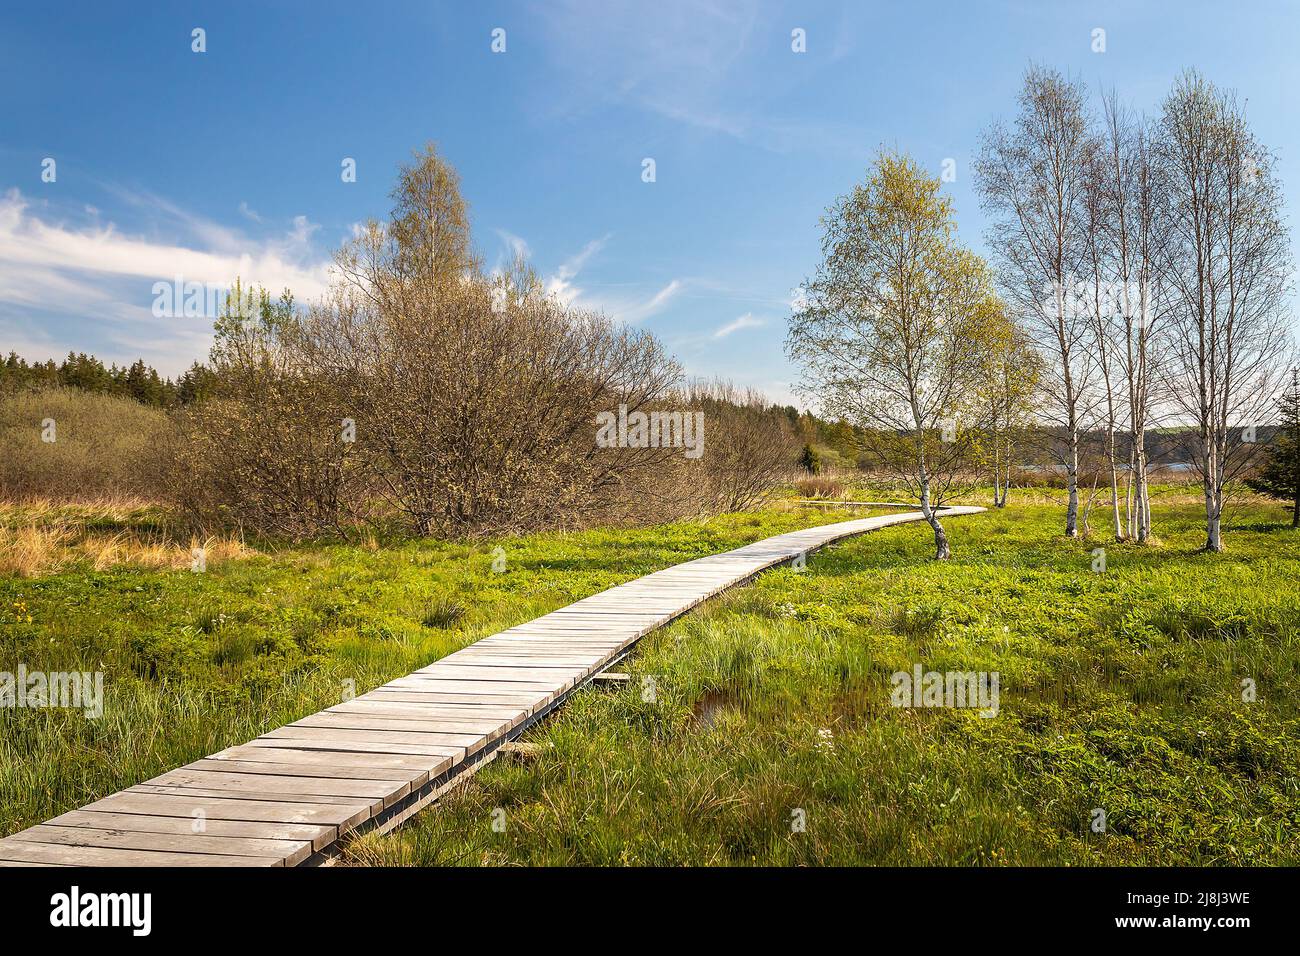 Landscape with a boardwalk - a wooden walkway in the wetlands around the Olsina pond, Czech Republic Stock Photo